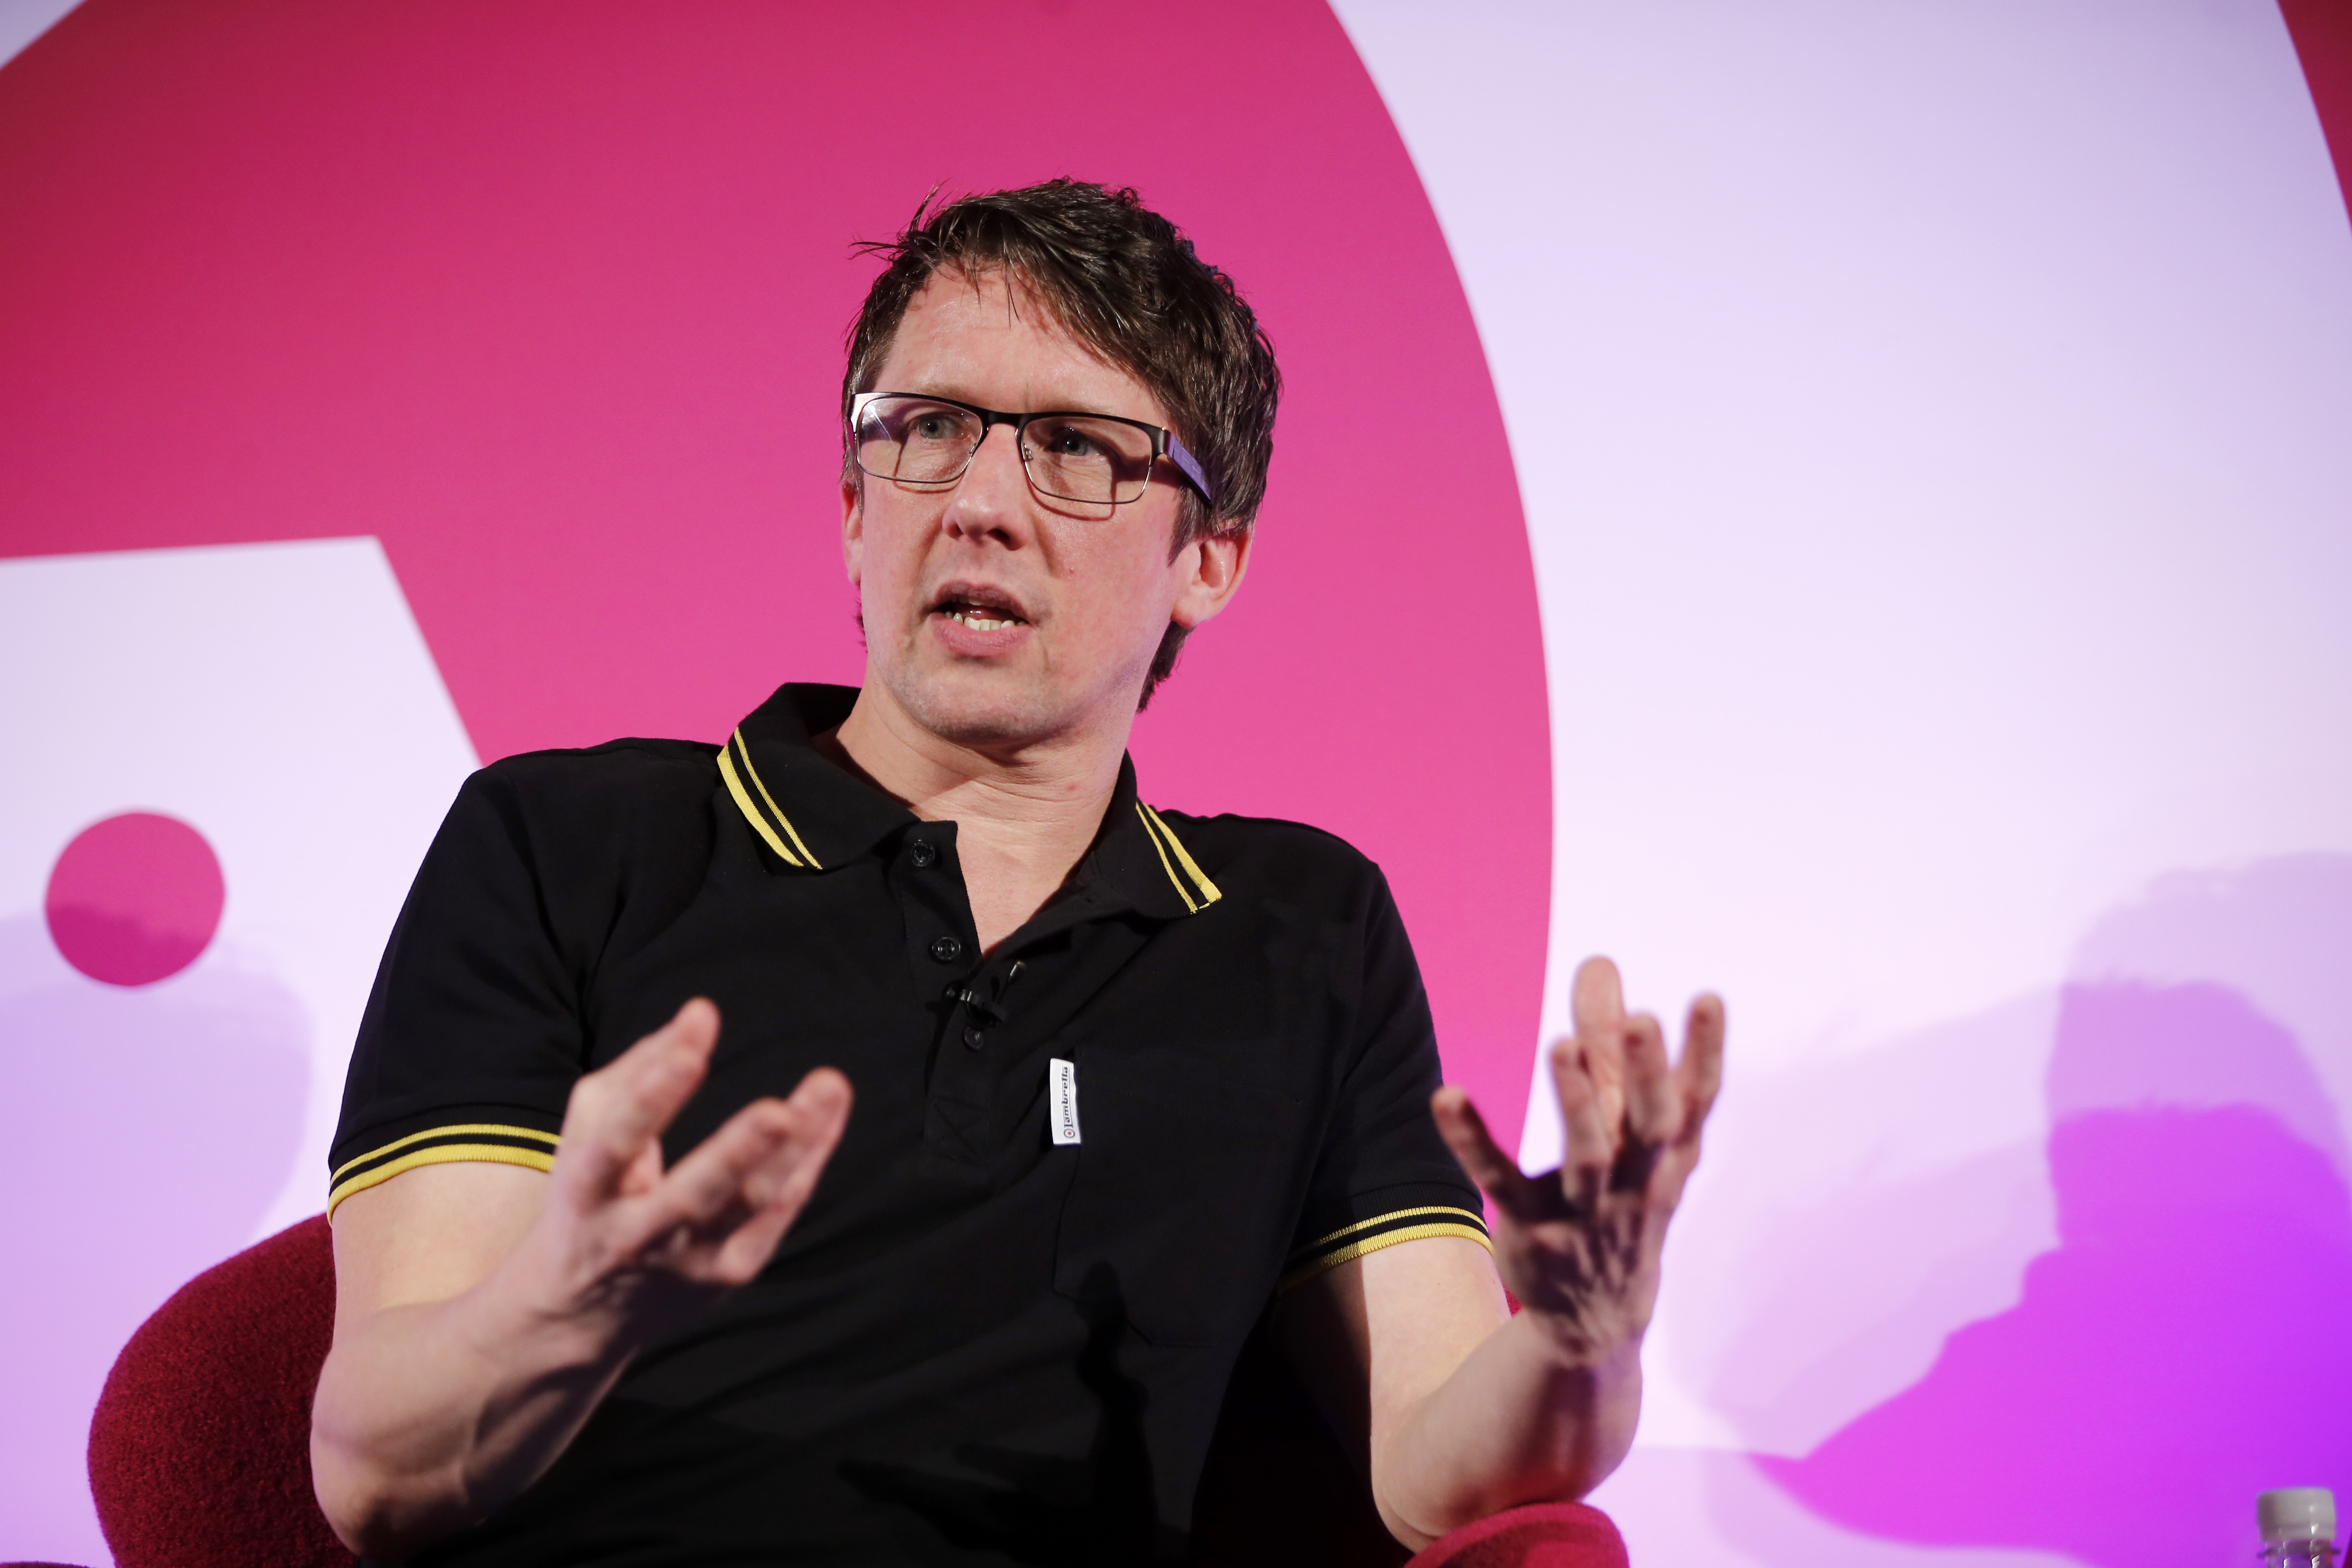 When Satire Met Social: Jonathan Pie seminar, Advertising Week Europe 2017, Fast Company Stage, Picturehouse Central, London, UK